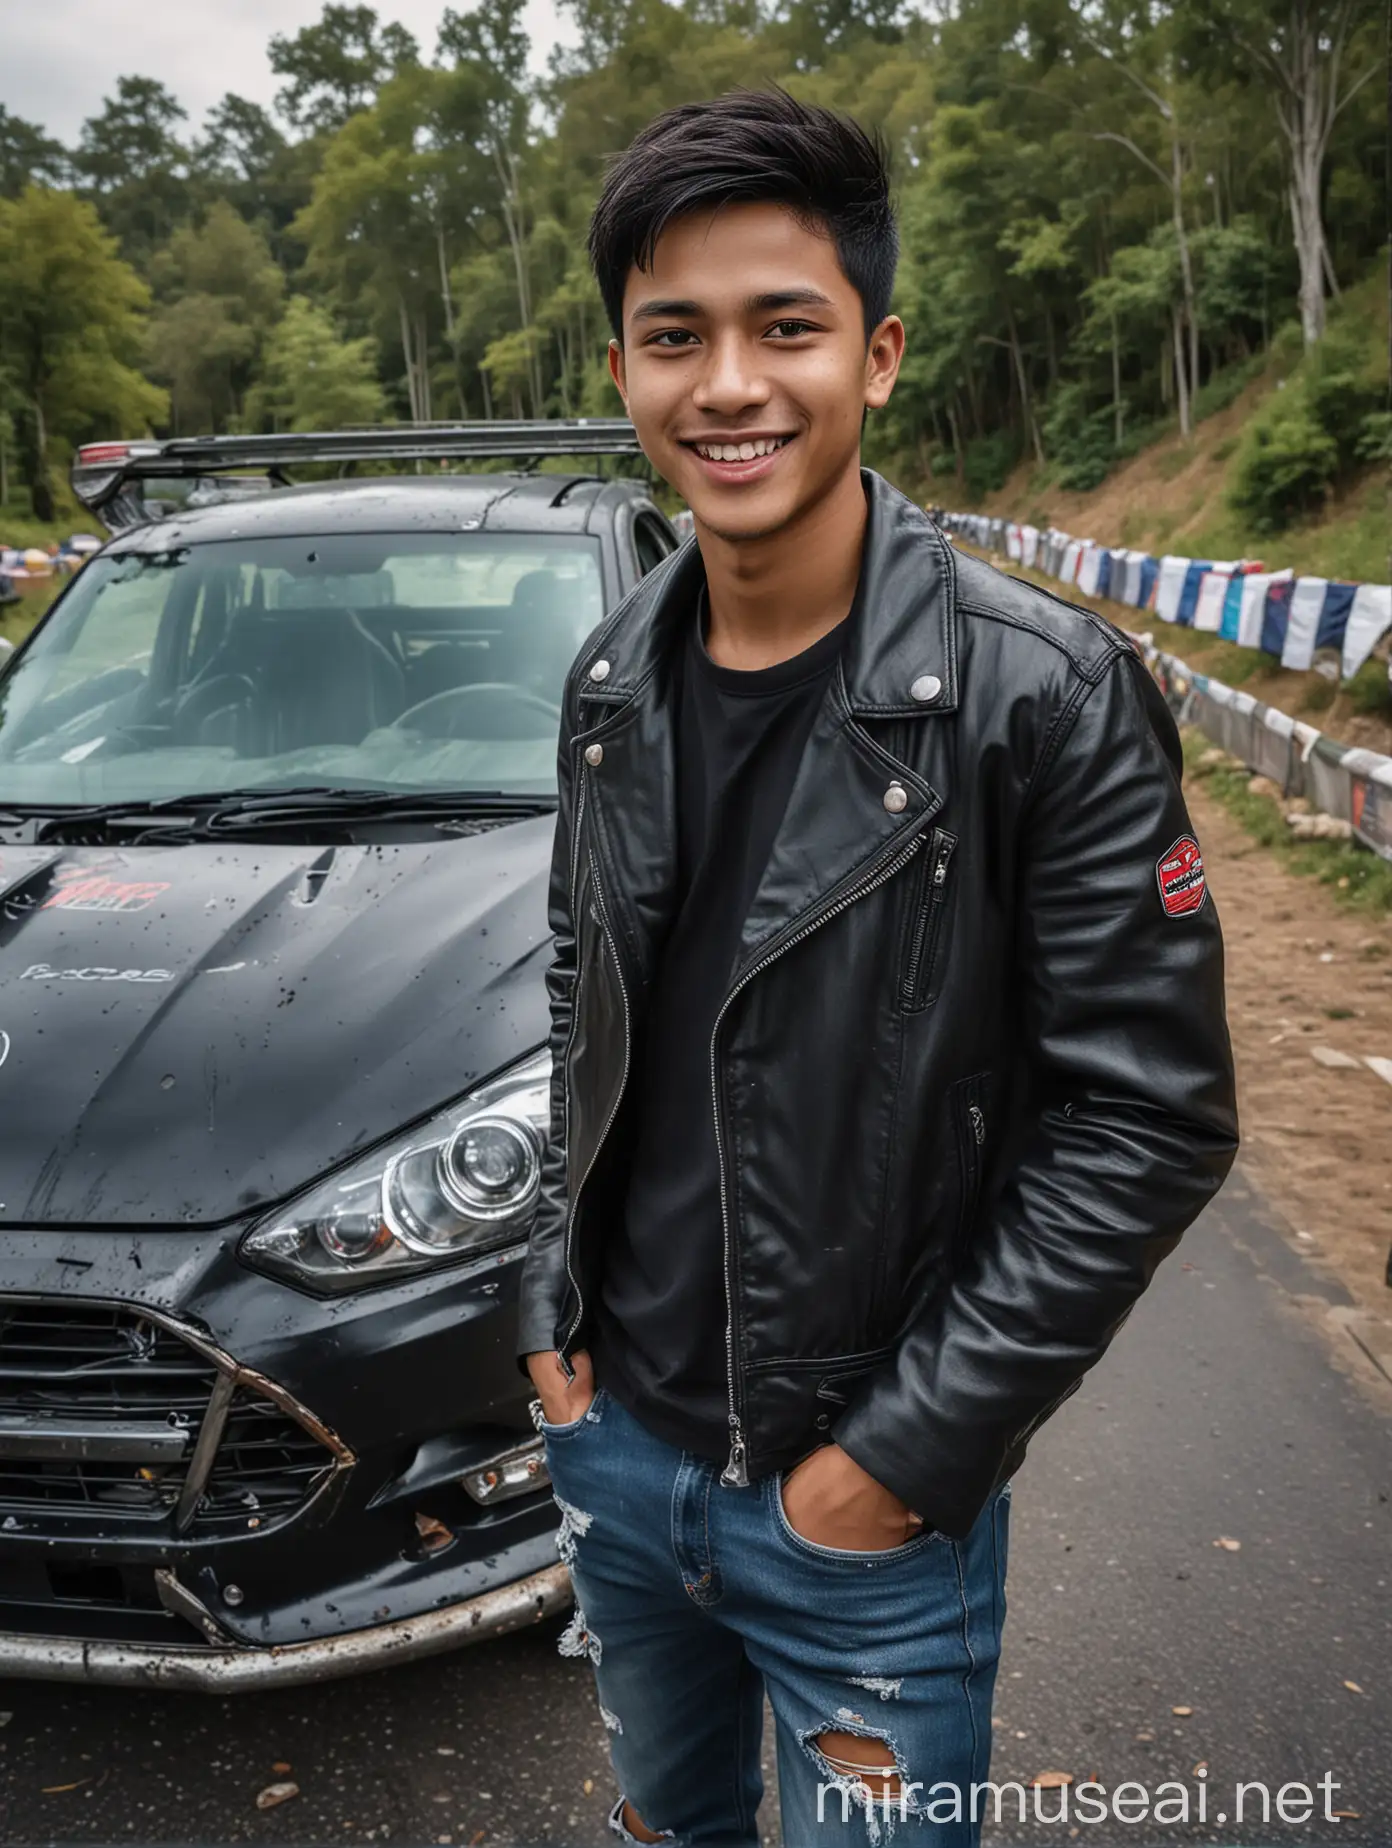 Smiling Indonesian Man Next to Rally Car on Hilltop Overlooking Winding Road